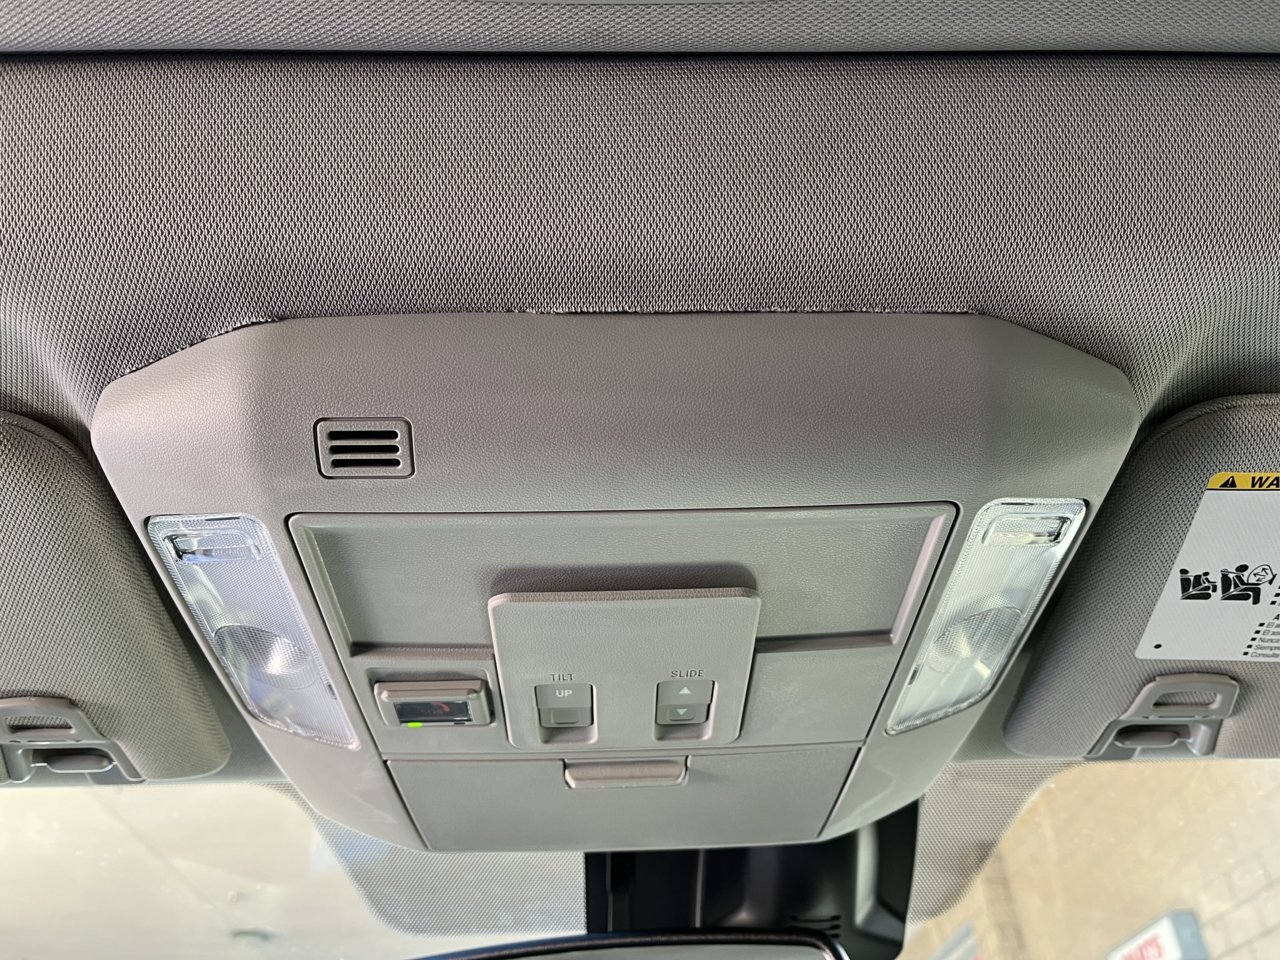 2021 with headliner issues | Toyota Tundra Forum